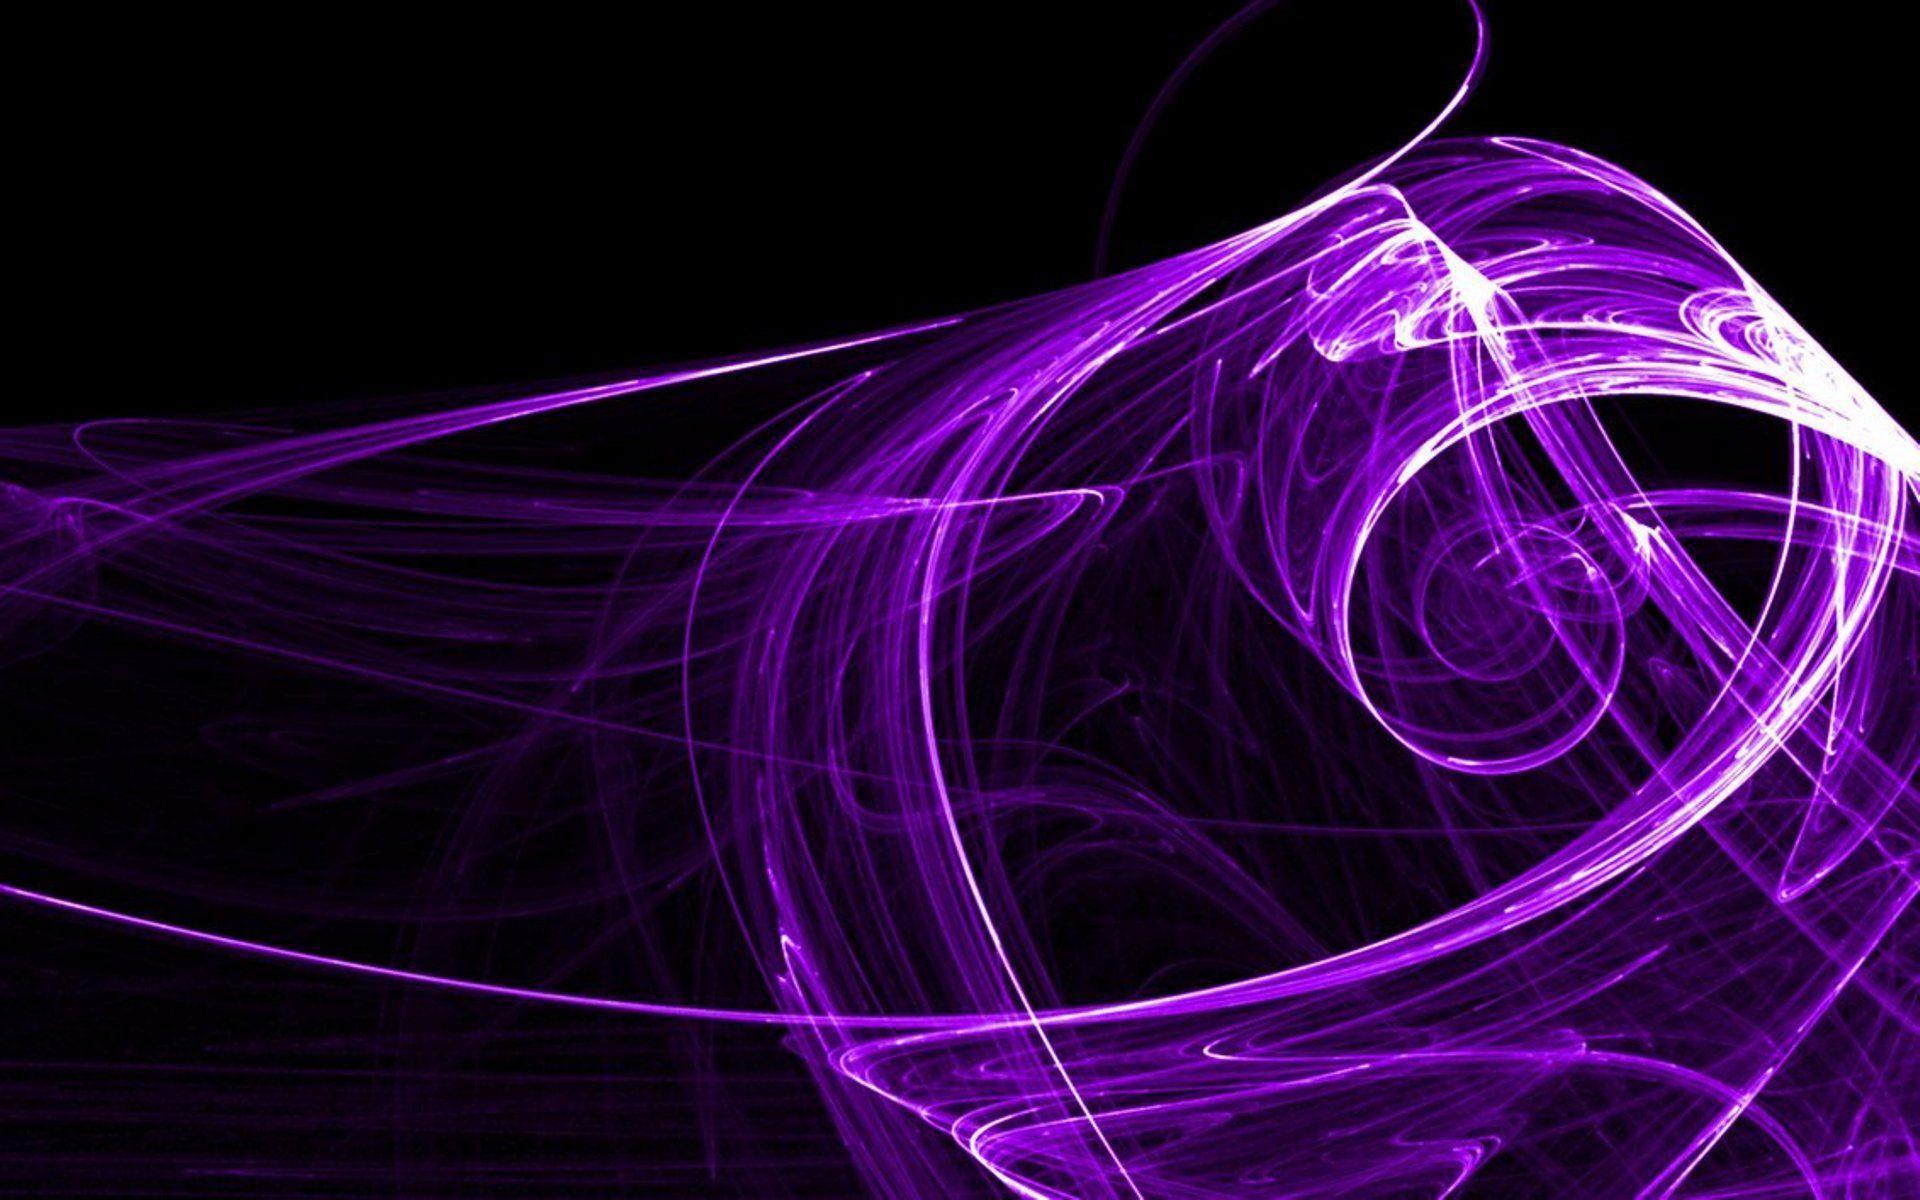 Black and Purple Abstract Art Cool Wallpapers 1920x1200PX ~ Purple